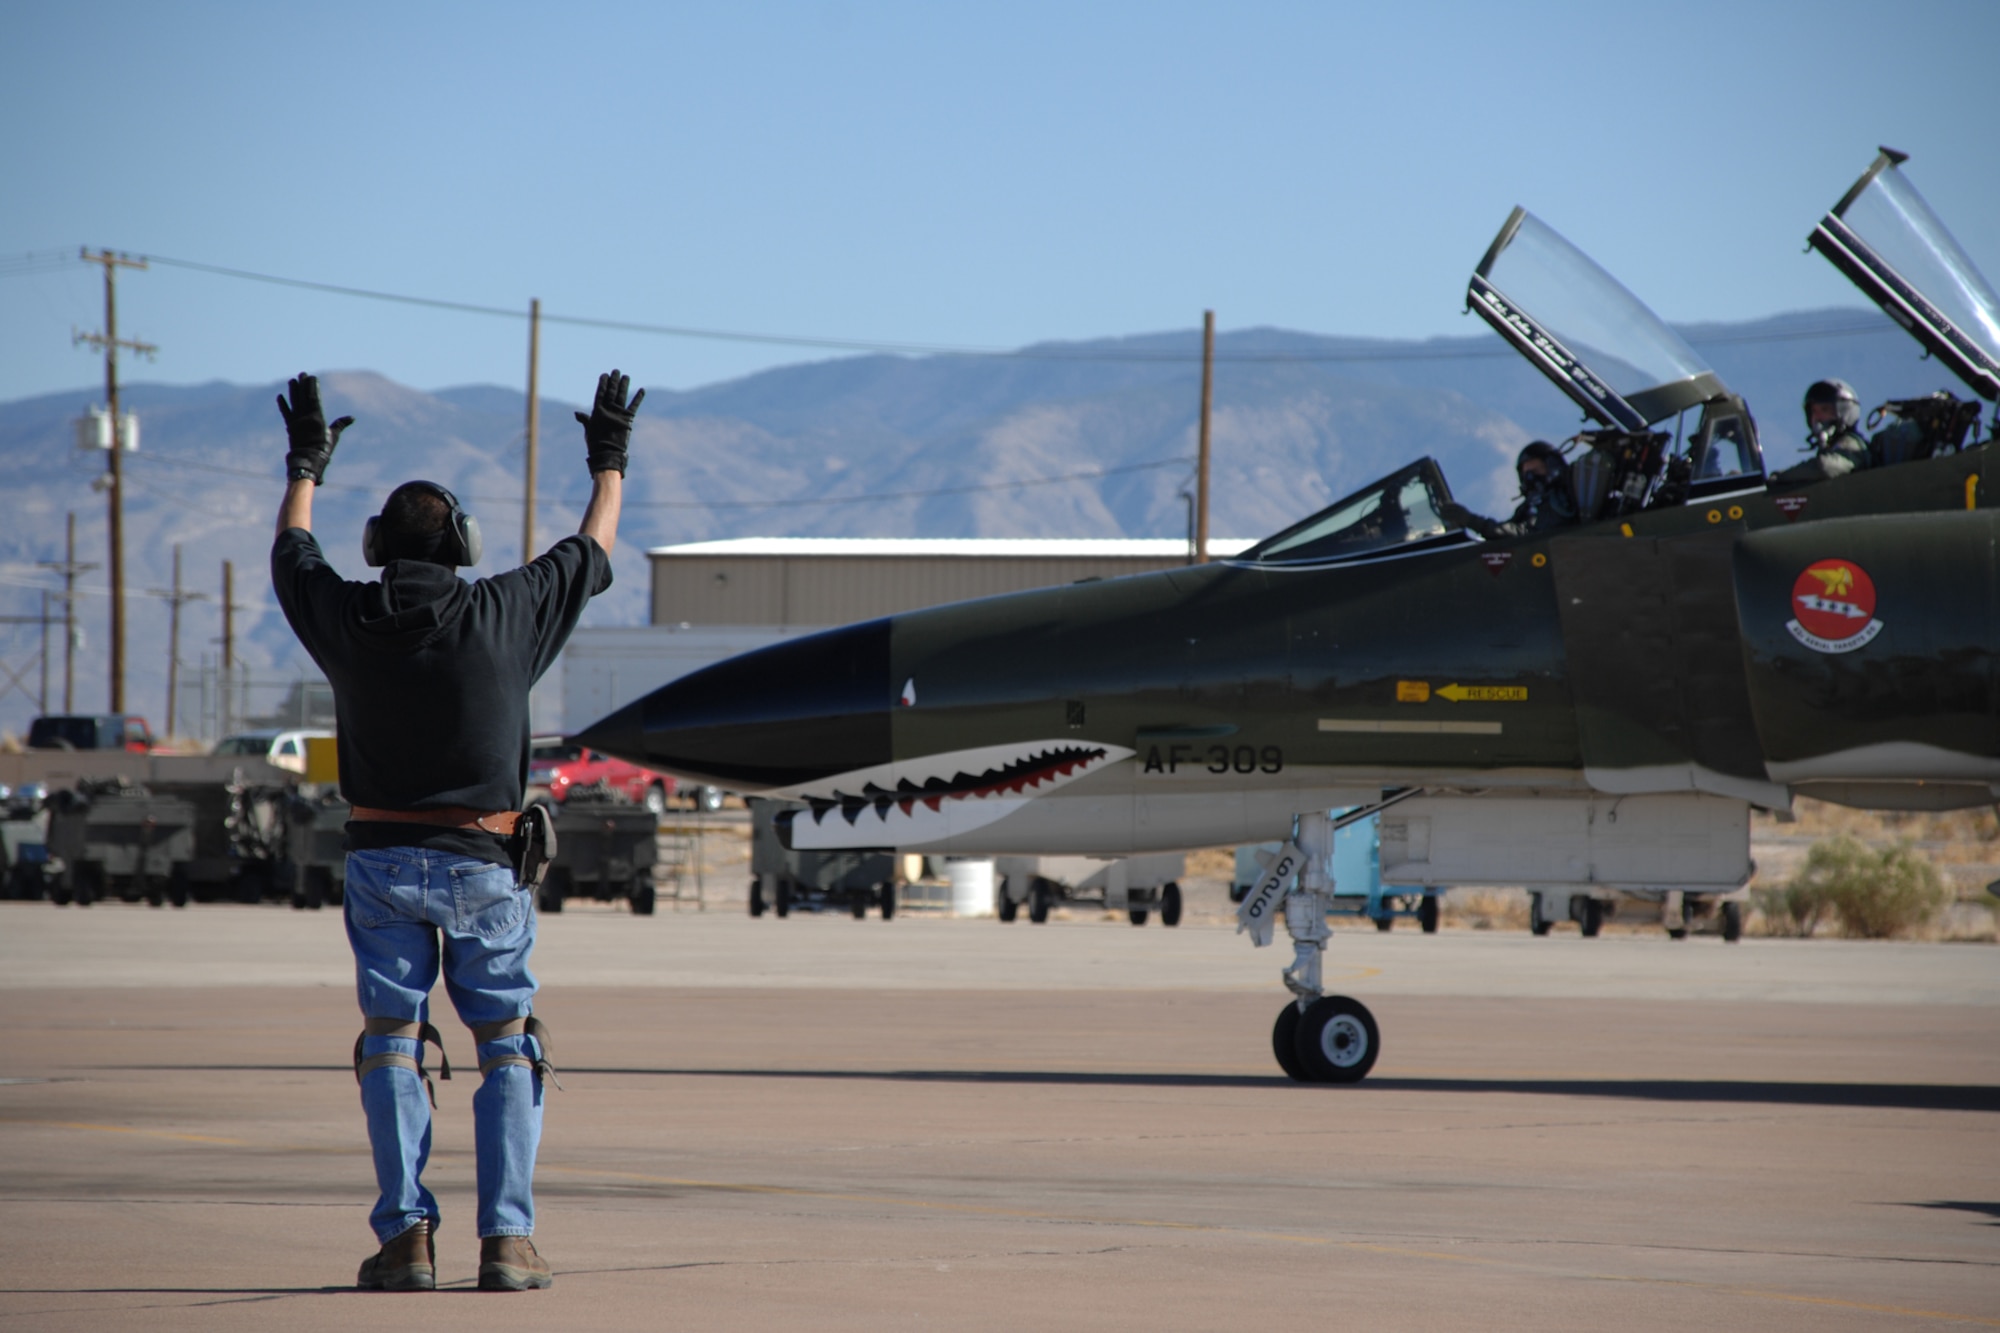 Bobby Aguilera, Lockheed Martin Services Incorporated, marshalls the aircraft after a succesful flight in a F-4 Phantom by Brig. Gen. David Goldfein, 49th Fighter Wing commander, Dec. 20, 2007, at Holloman Air Force Base, N.M. This was General Goldfein's first flight in the Phantom. (U.S. Air Force photo/Airman 1st Class Jamal D. Sutter)